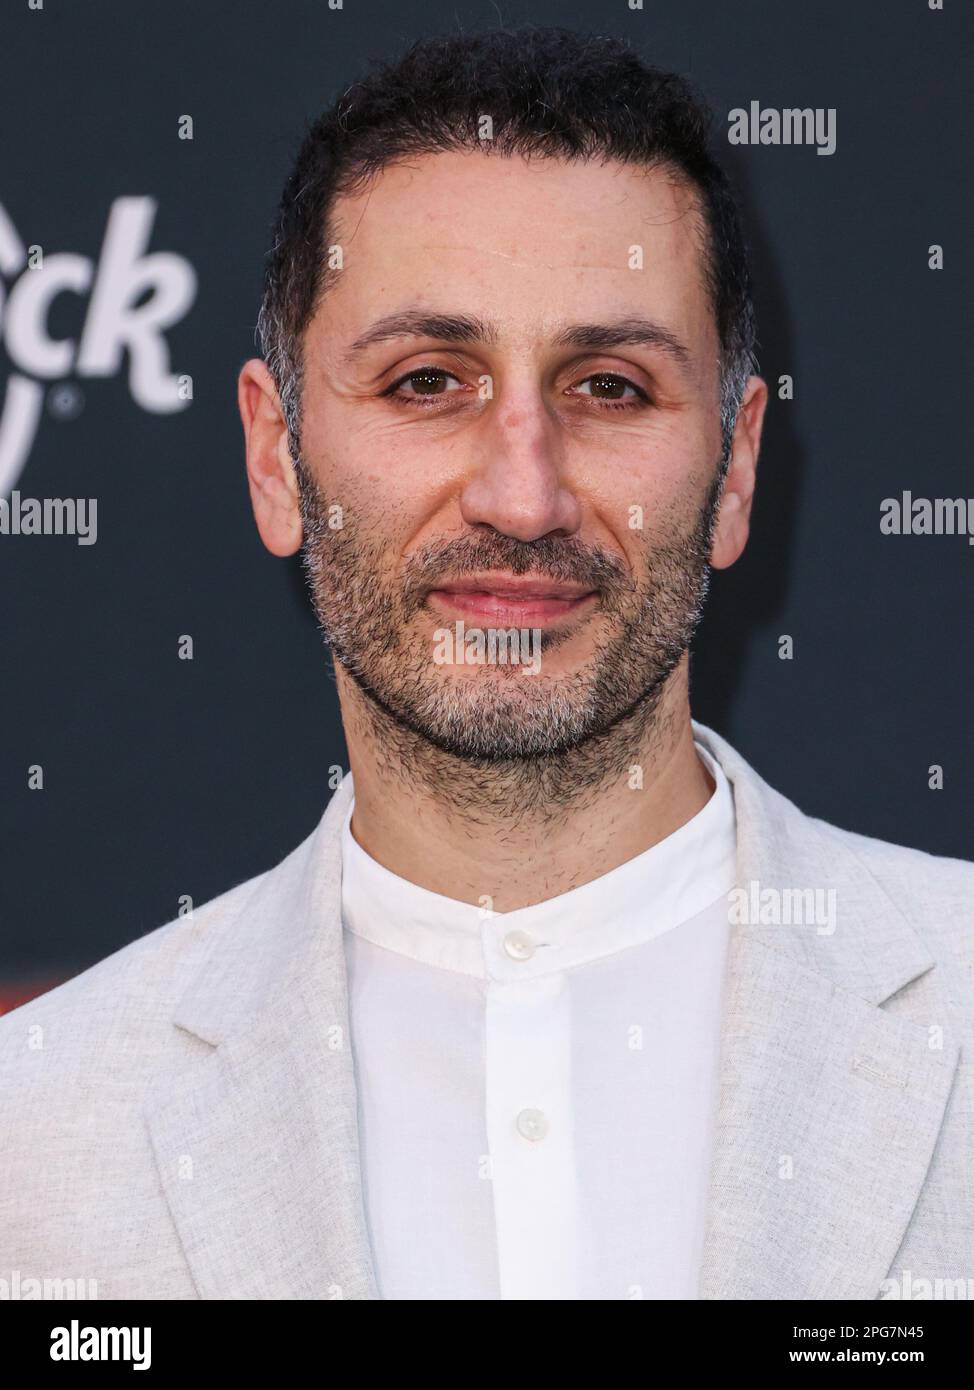 HOLLYWOOD, LOS ANGELES, CALIFORNIA, USA - MARCH 20: Actor George Georgiou arrives at the Los Angeles Premiere Of Lionsgate's 'John Wick: Chapter 4' held at the TCL Chinese Theatre IMAX on March 20, 2023 in Hollywood, Los Angeles, California, United States. (Photo by Xavier Collin/Image Press Agency) Stock Photo